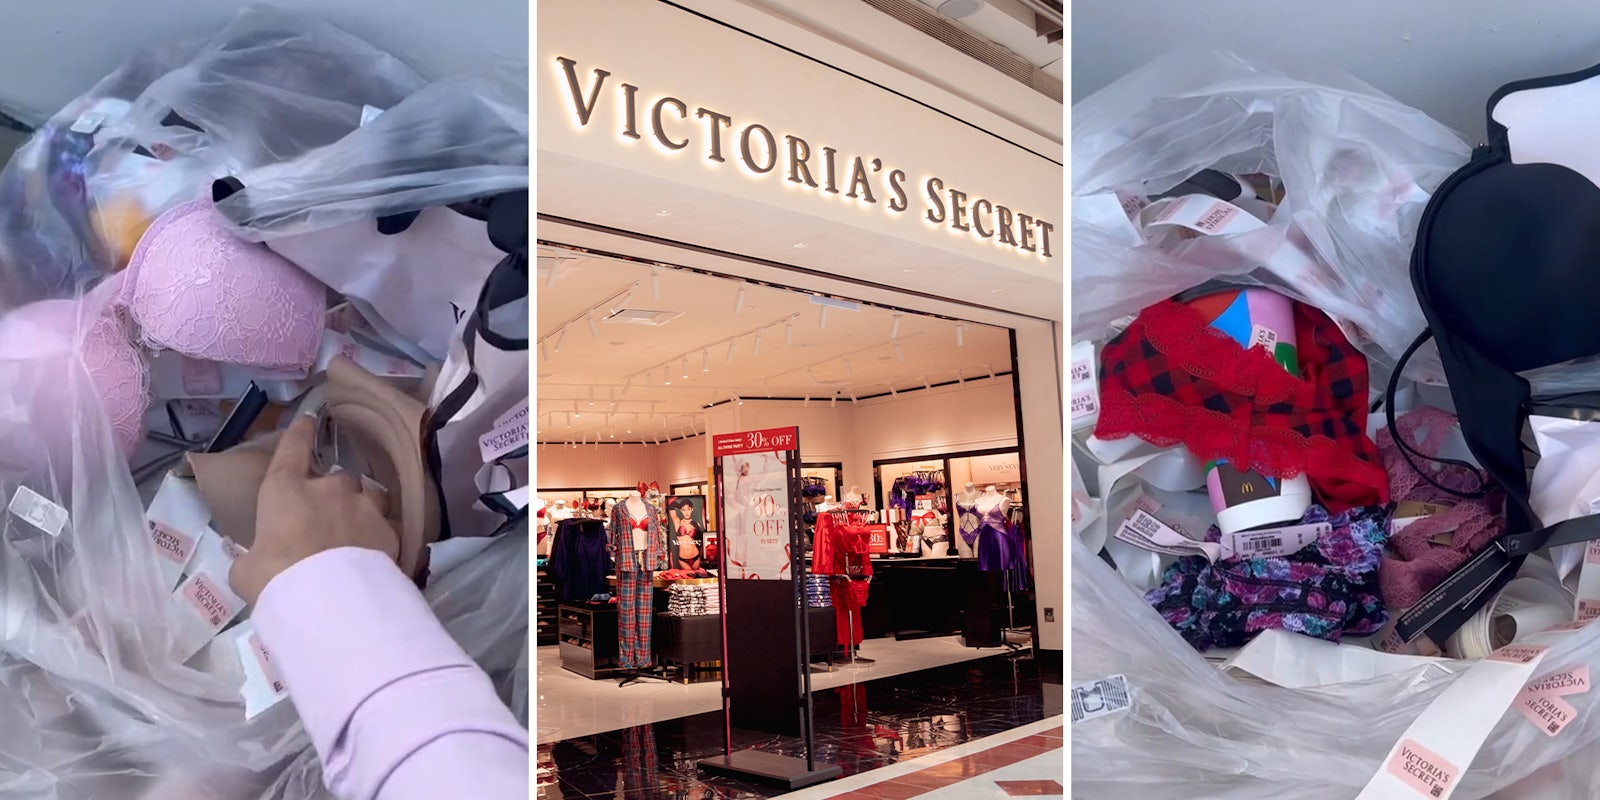 Customer finds bag of brand-new Victoria’s Secret items in dumpster. Viewers think it’s a worker’s stash for later